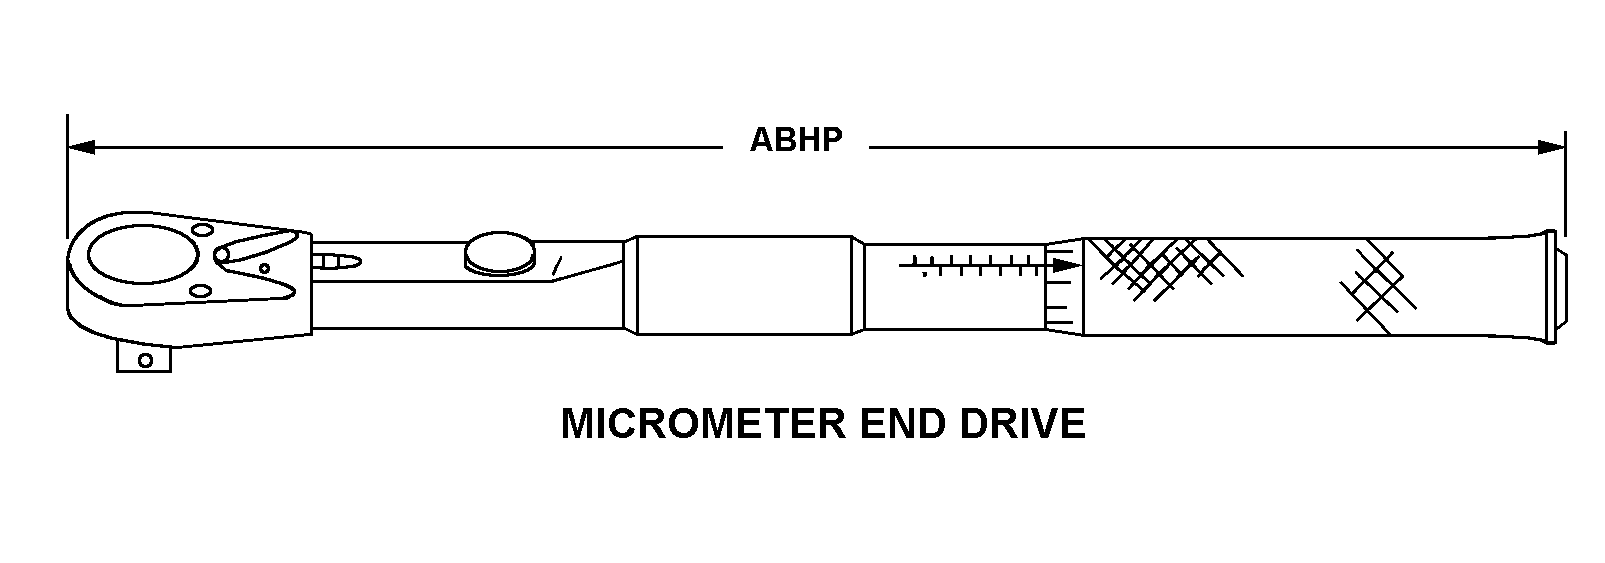 MICROMETER END DRIVE style nsn 5120-01-396-5946